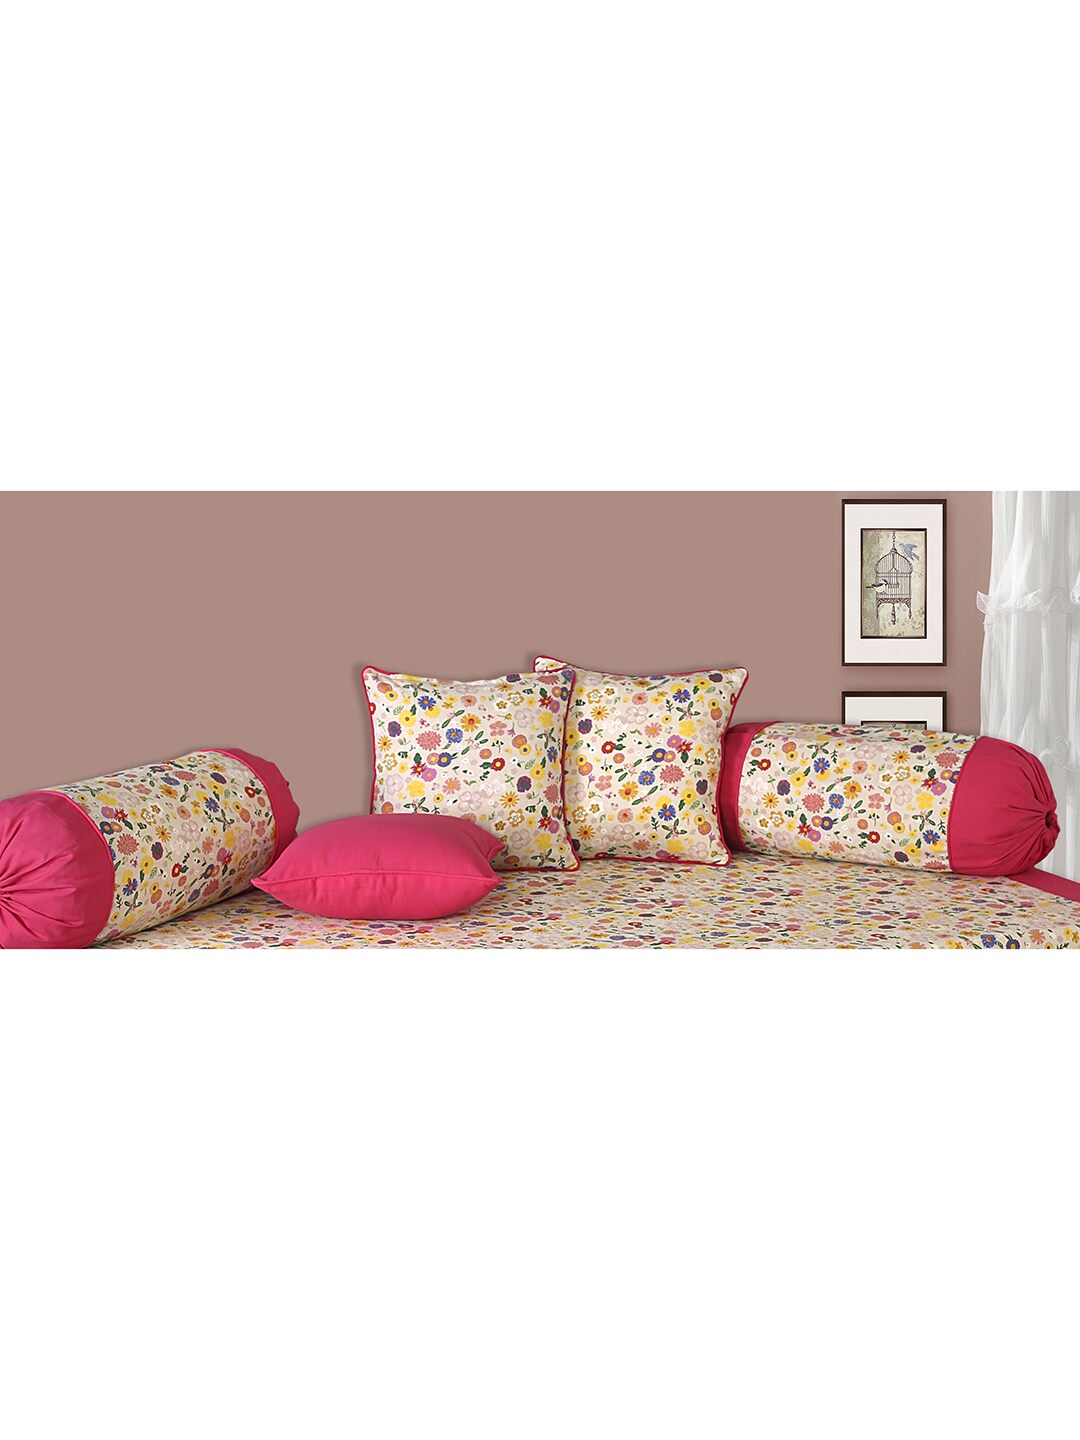 SHADES of LIFE Set Of 6 Pink & Beige Floral Printed Cotton Diwan Set Price in India